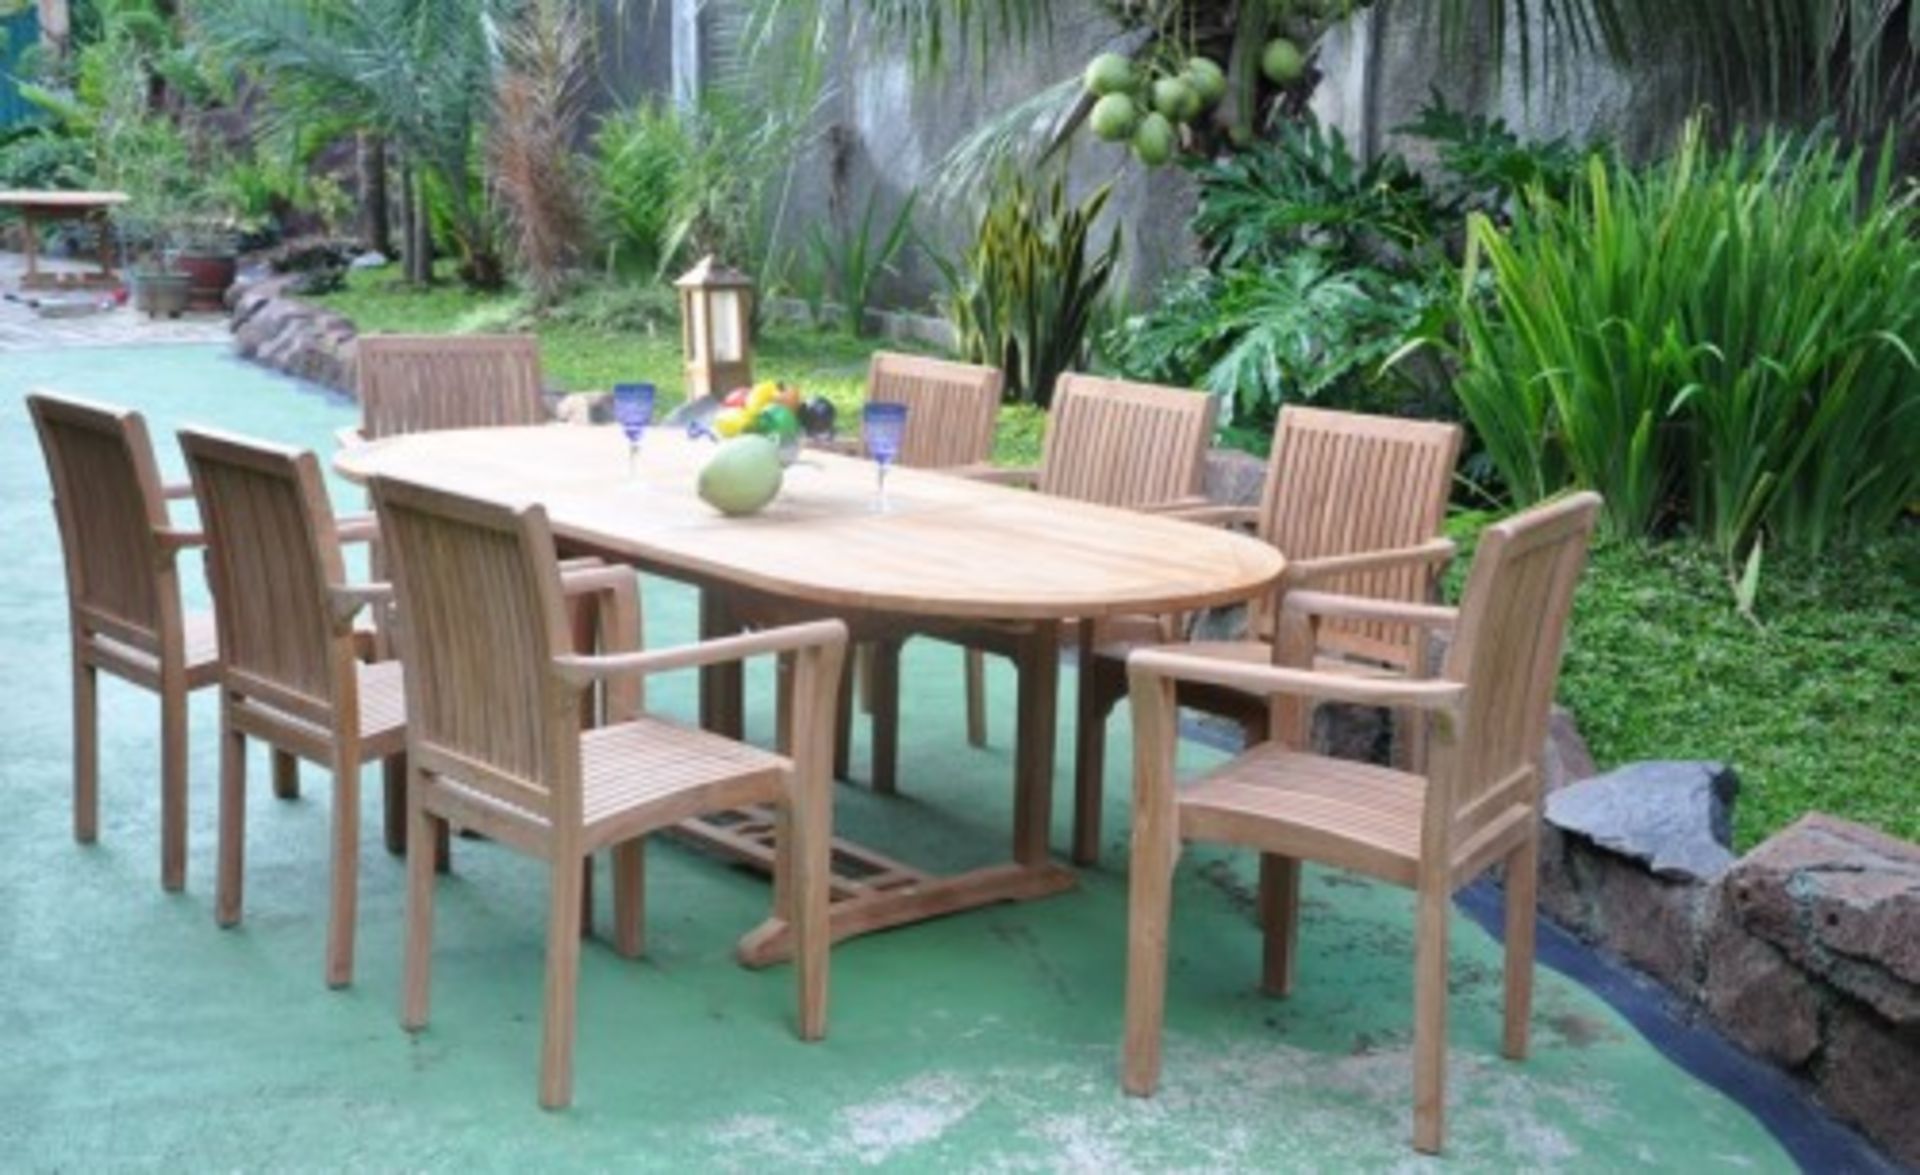 V Brand New Teak Extended Oval Table Set Allows For Up To 6 People including 6 stacking chairs /